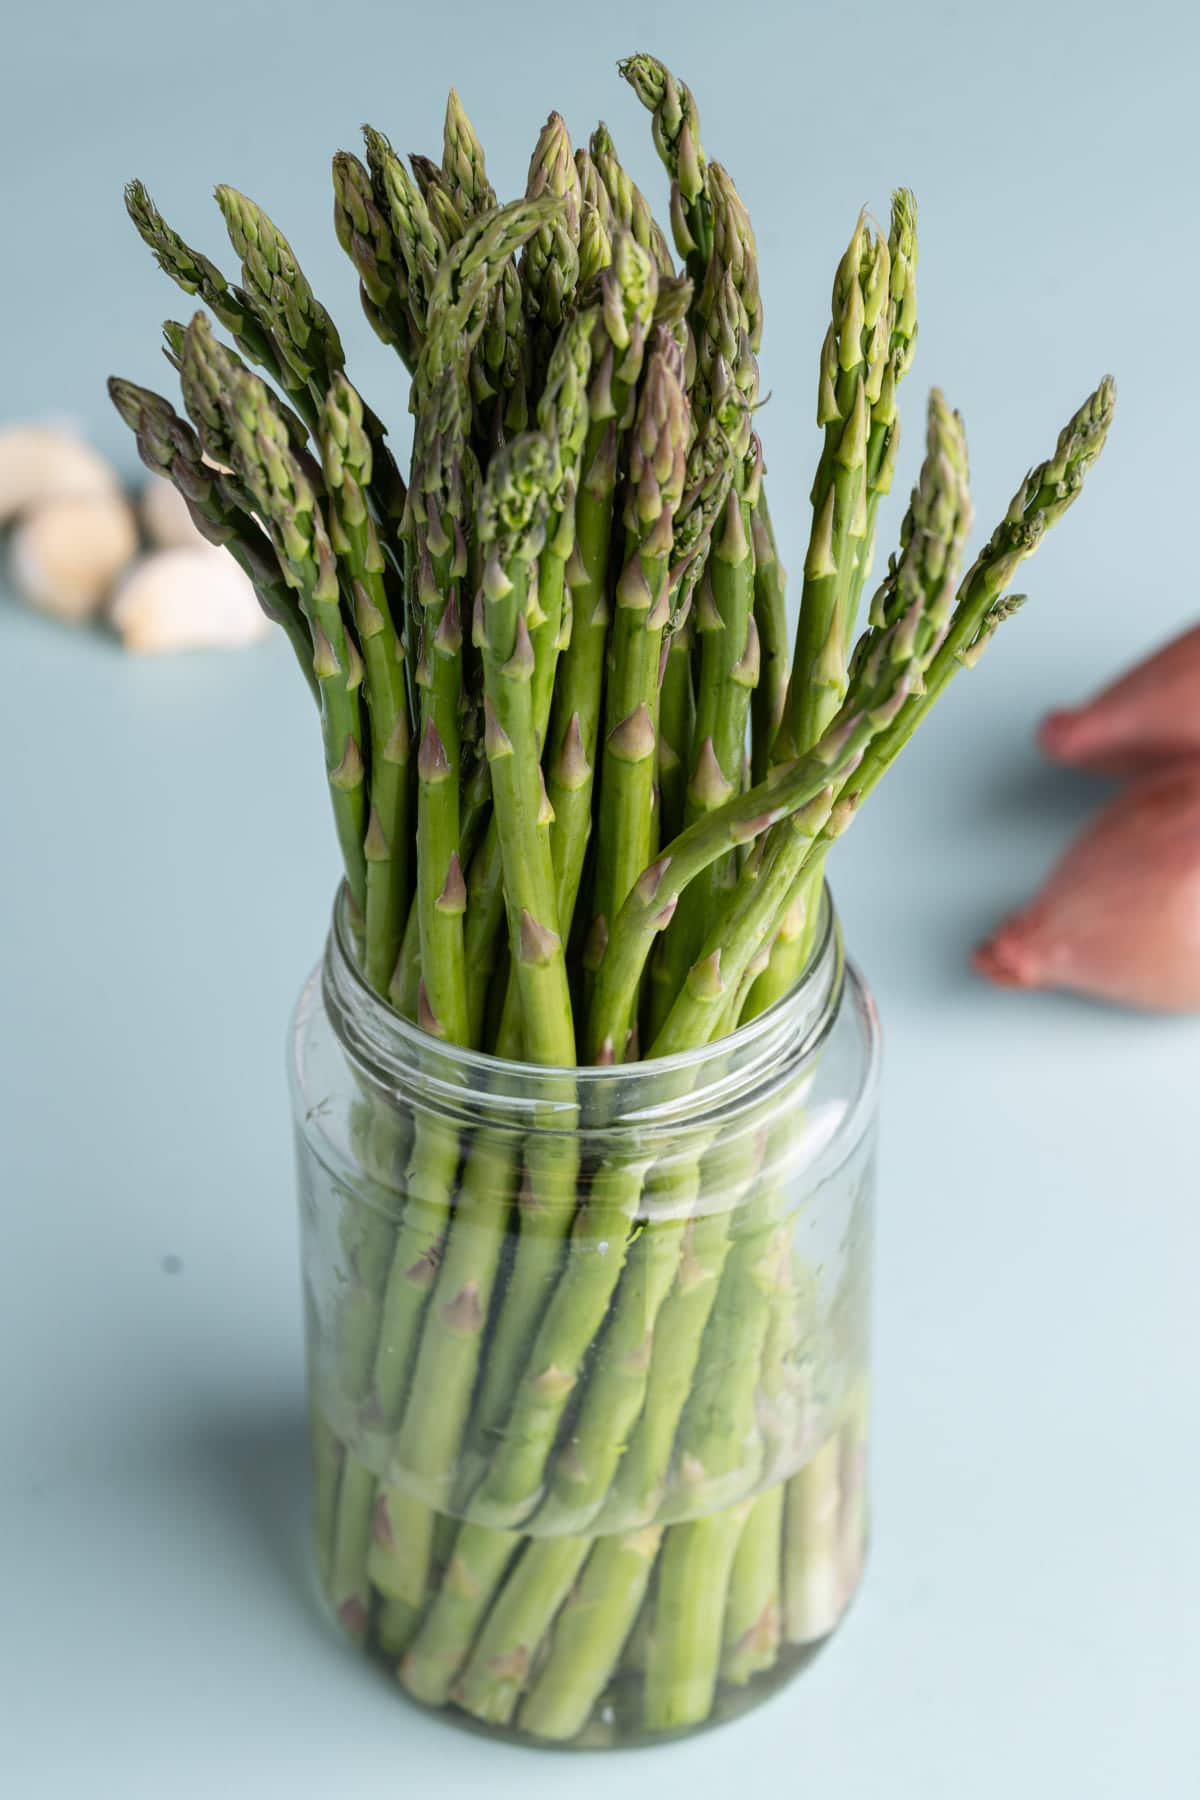 Storing asparagus in a jar with their stems submerged in water to keep it fresh longer